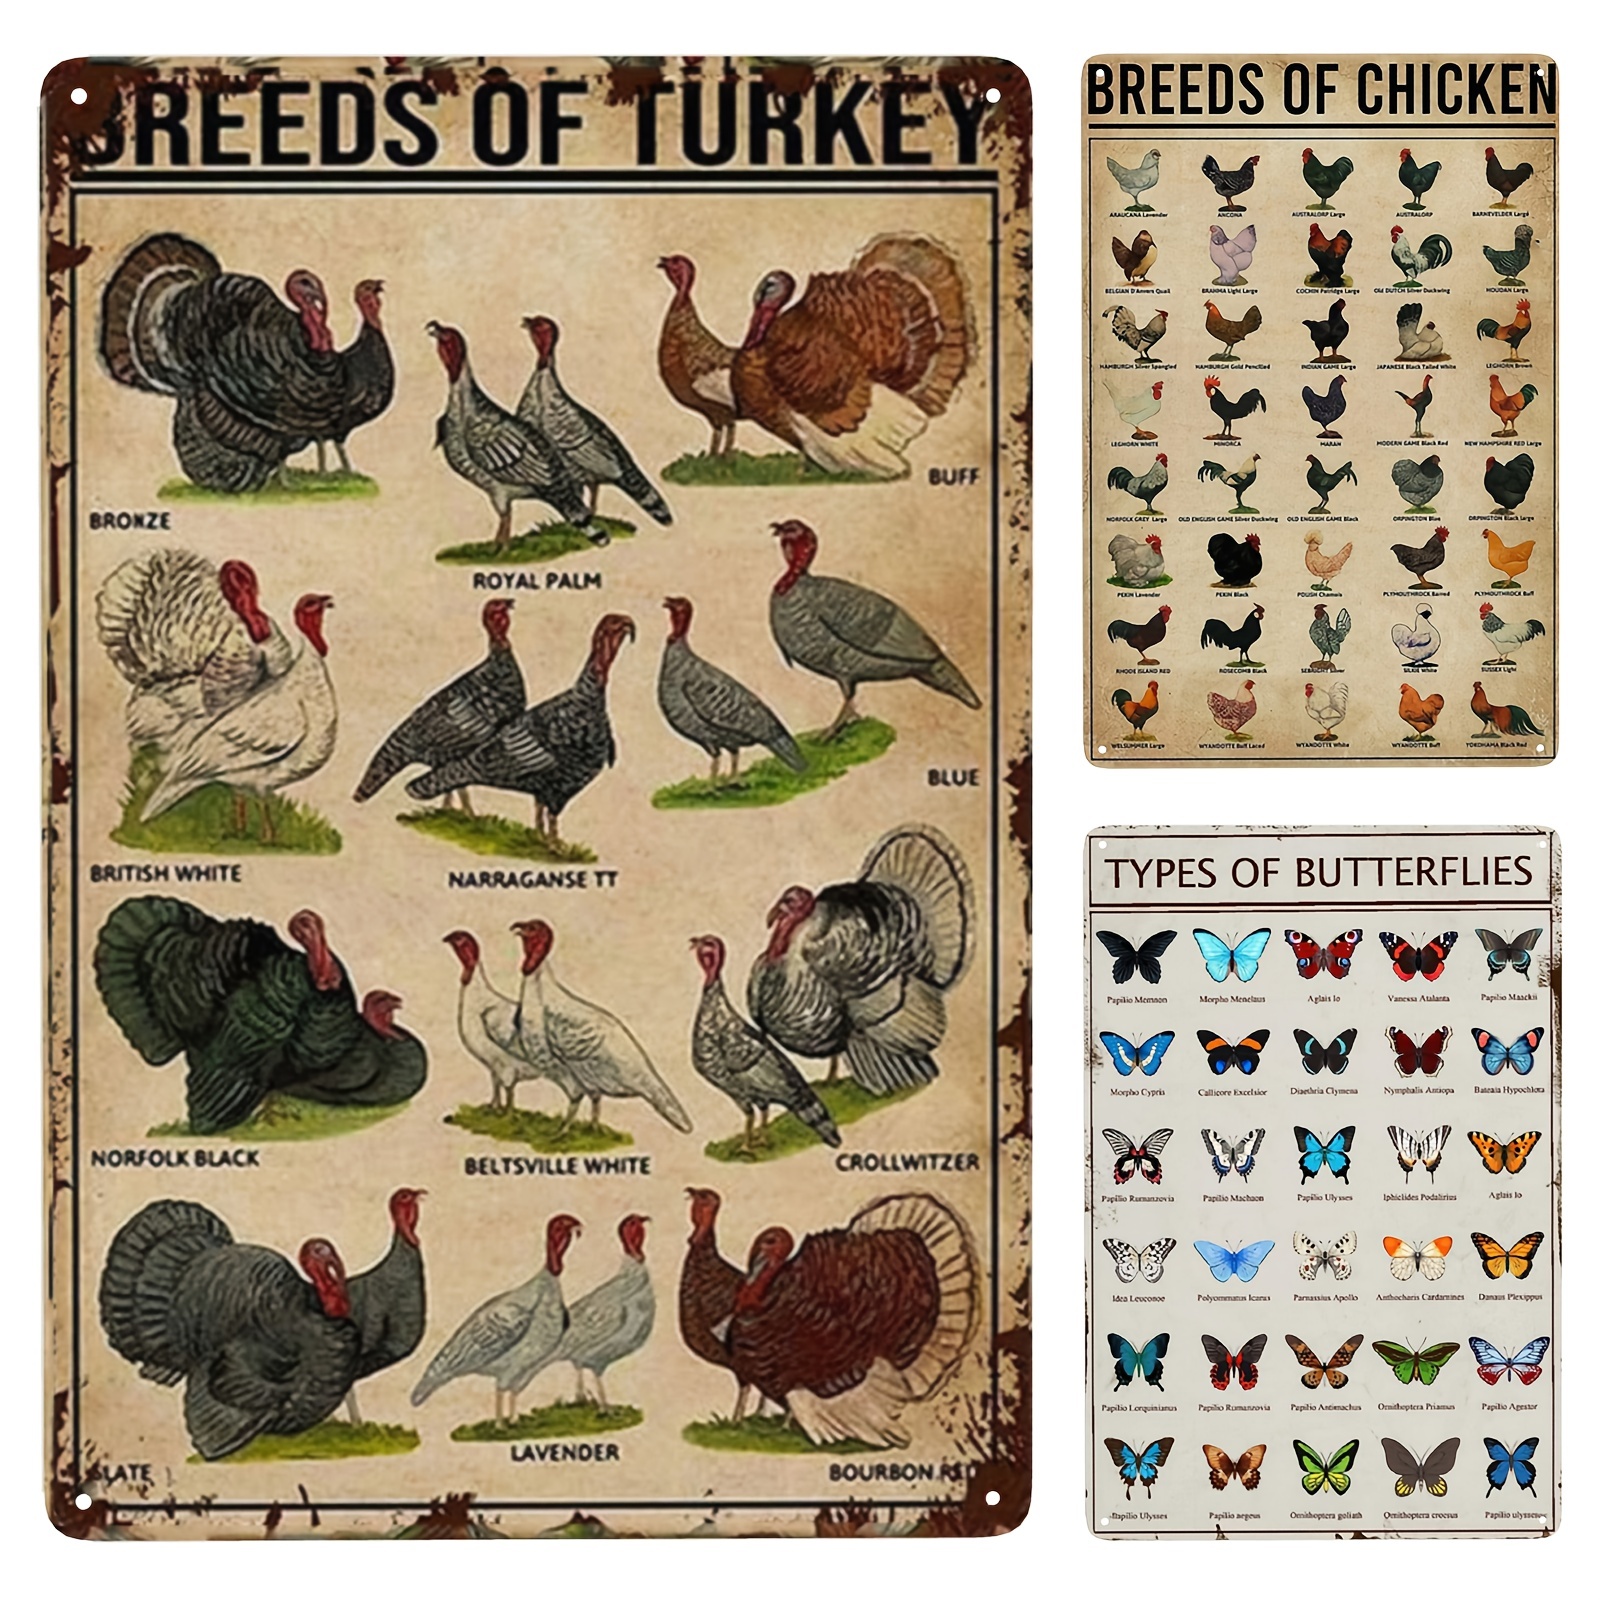 Breeds of Chickens Poster Wall Art Home Decor Vintage Metal Tin Signs  Coffee Shop Plate Iron Painting Warn Retro Novelty Funny Humorous Bar Pub